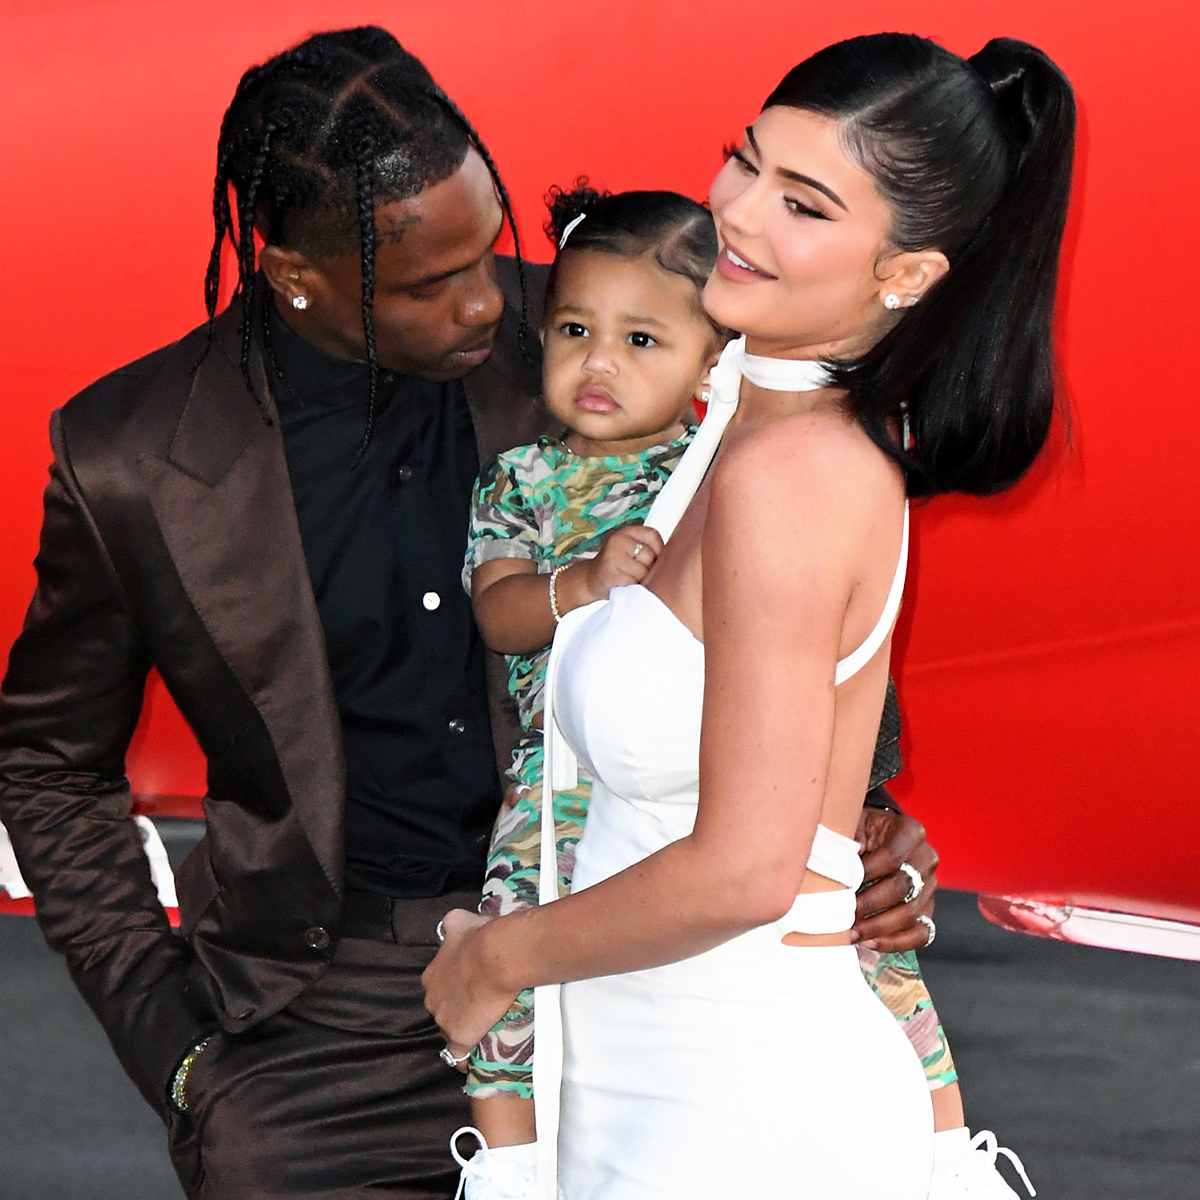 Kylie Jenner Reveals Where She & Ex Travis Scott Stand as Co-Parents